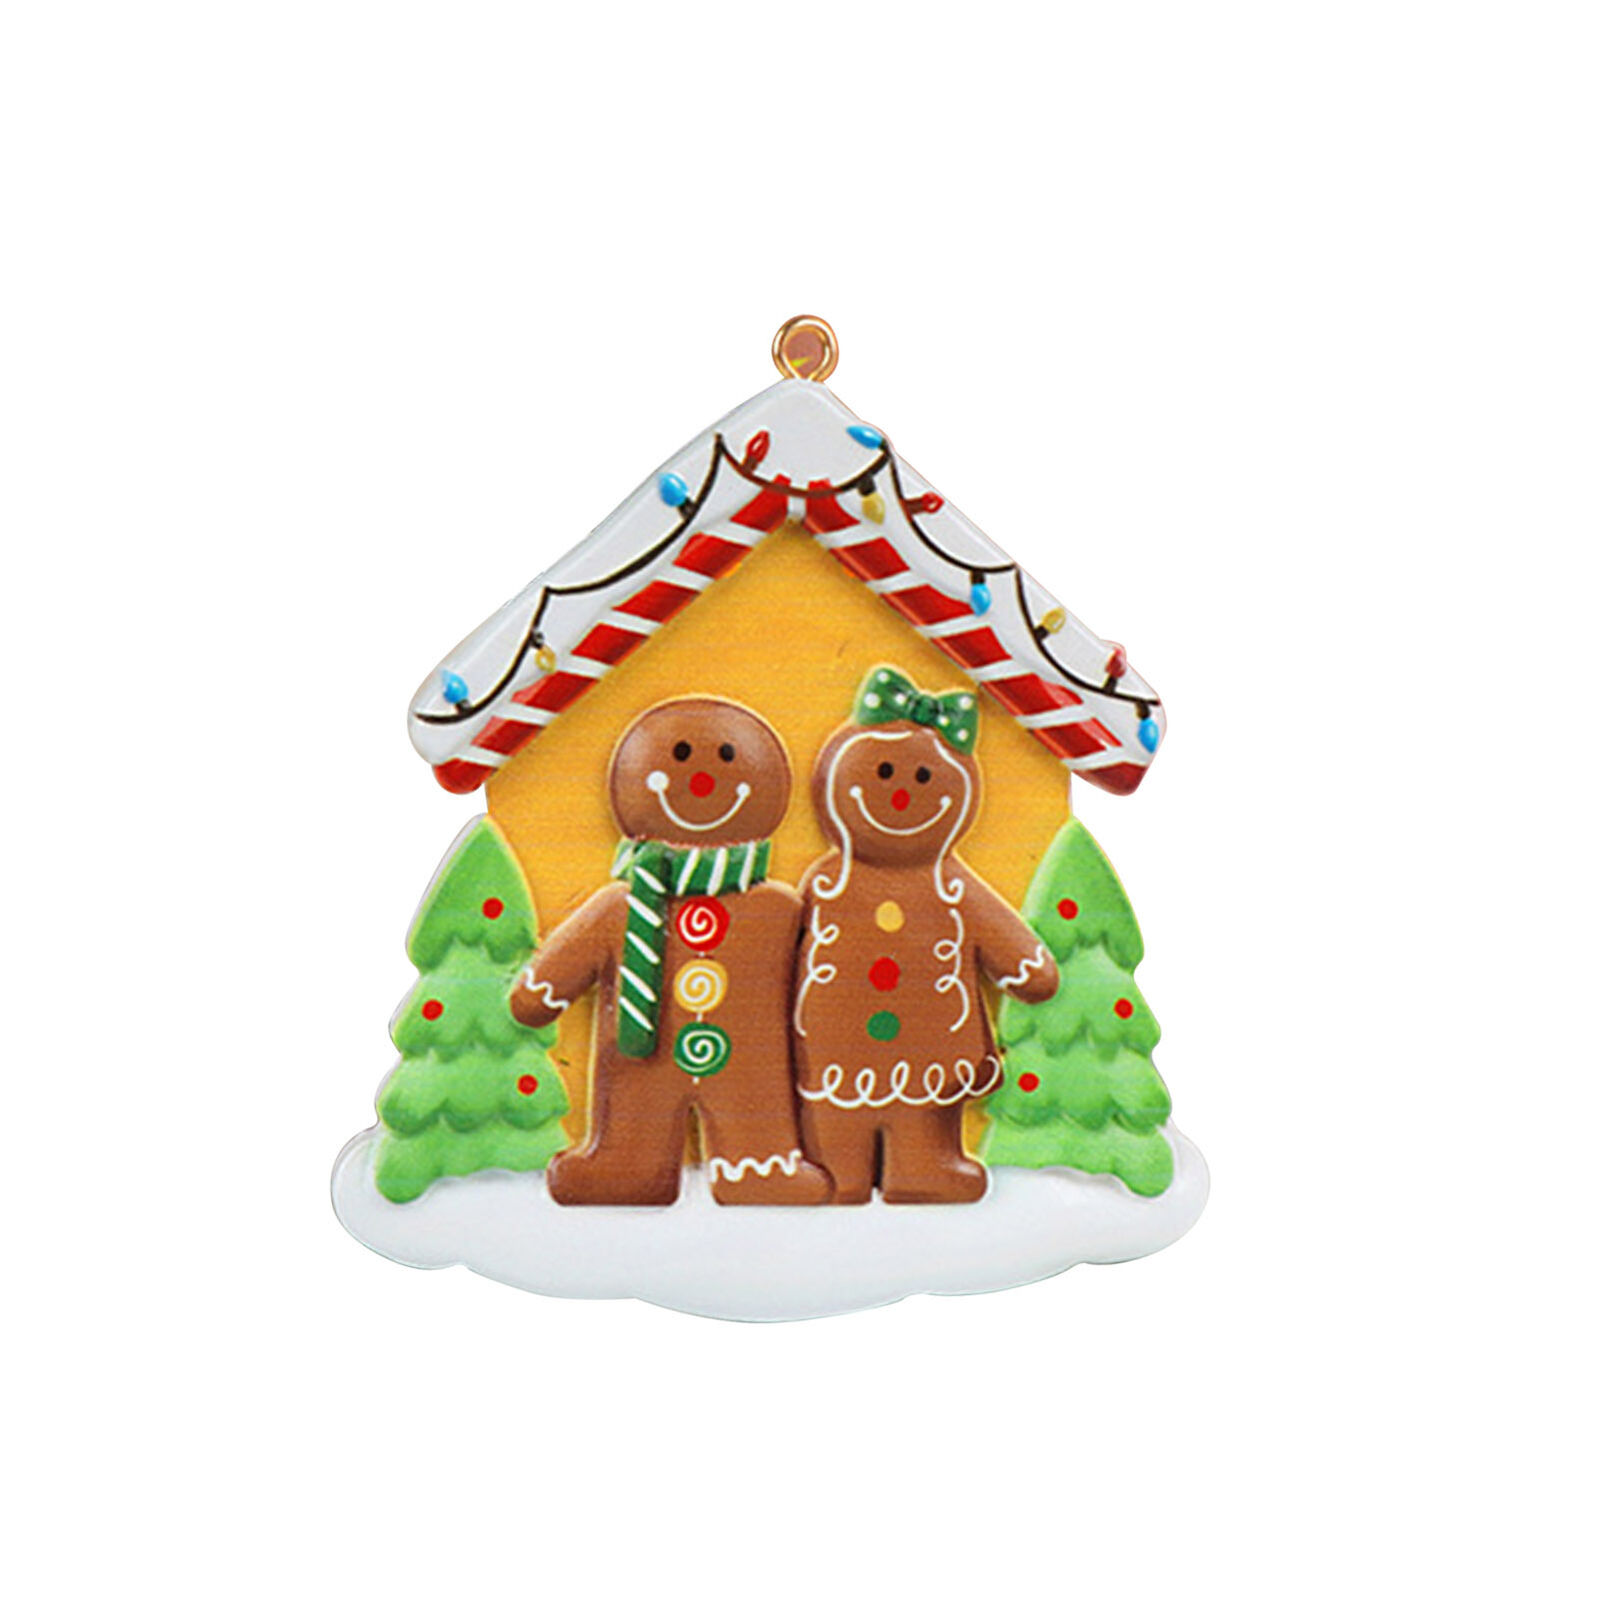 Gingerbread Man Christmas Ornaments Christmas Tree Gingerbread Man exceptional